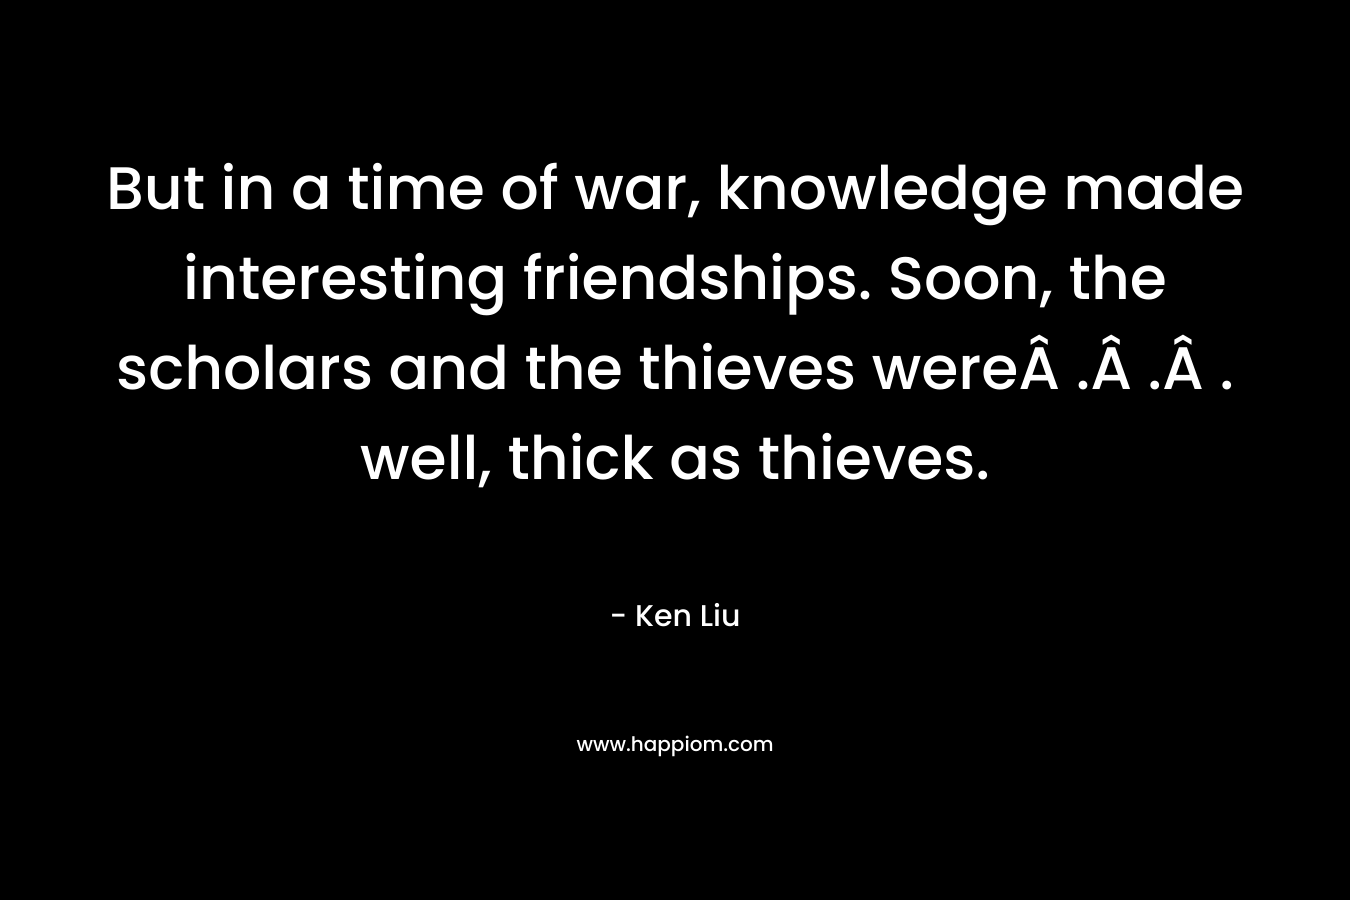 But in a time of war, knowledge made interesting friendships. Soon, the scholars and the thieves wereÂ .Â .Â . well, thick as thieves. – Ken Liu